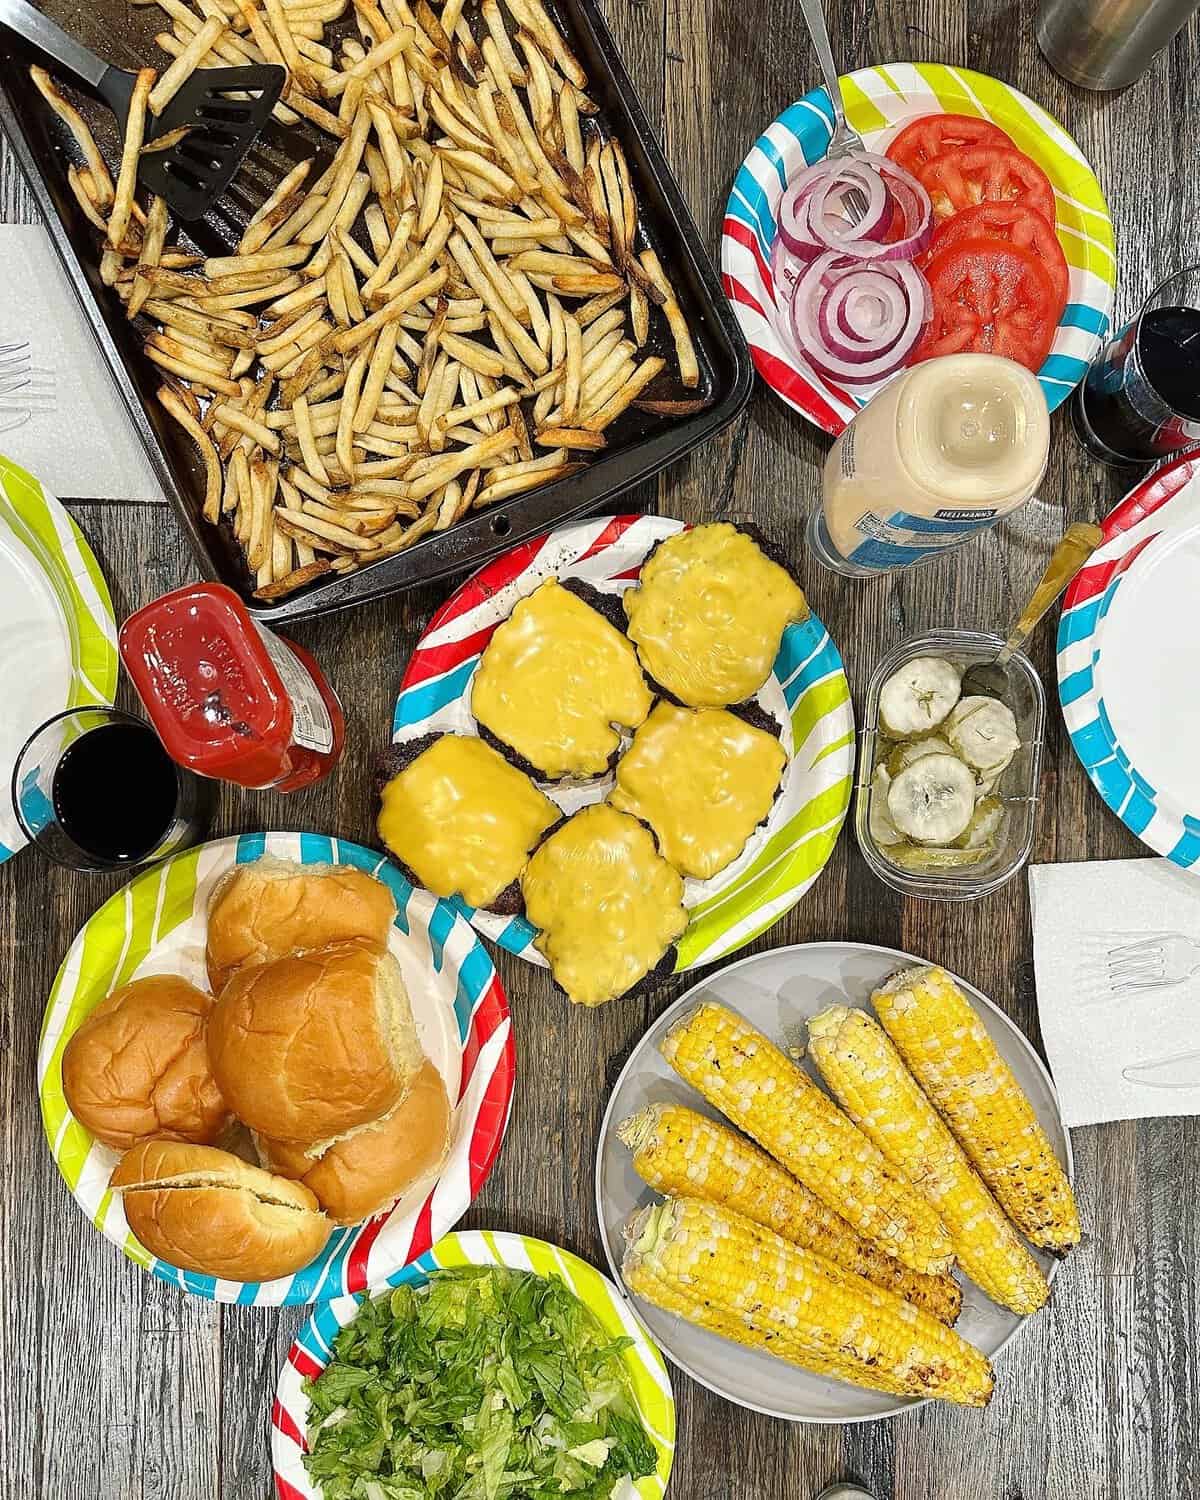 A baking sheet of French fries, a plate of five cheese burgers with yellow cheese, a plate of buns and a plate of grilled corn on a wooden table.